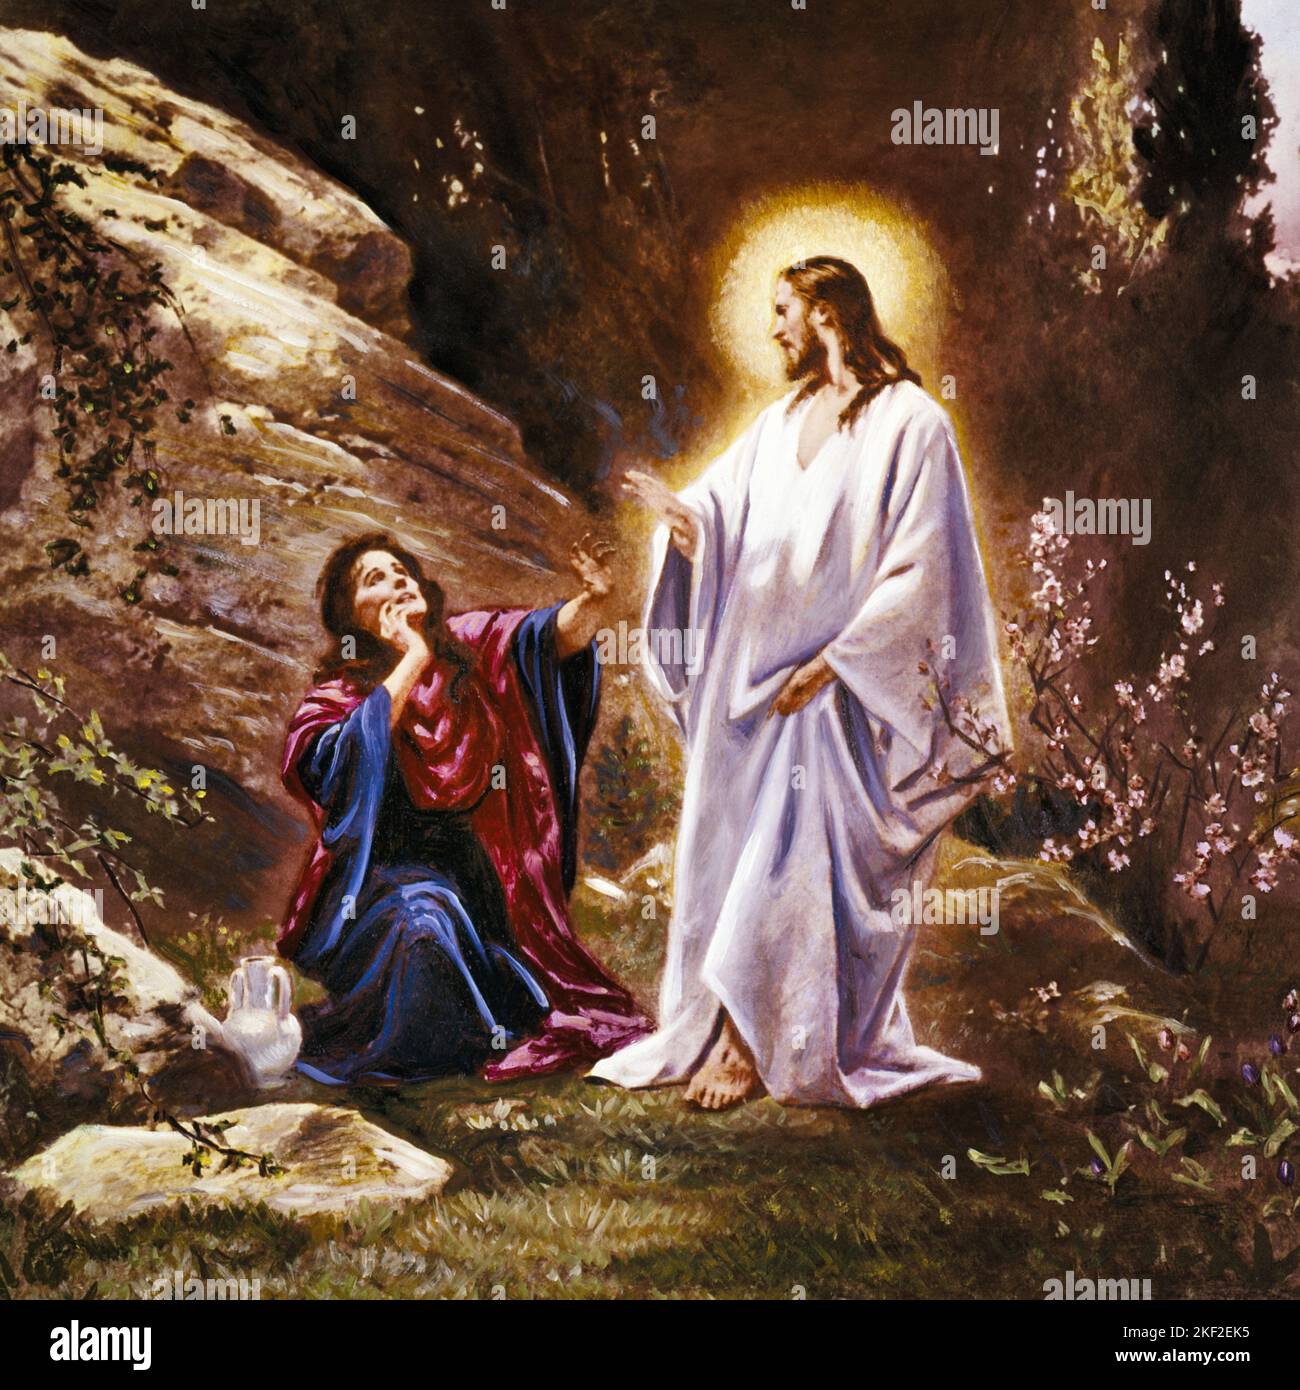 1960s 33 AD RESURRECTION OF JESUS APPEARING TO MARY MAGDALENE ON EASTER MORNING PAINTING BY SCHMIDT  - kr6899 SPL001 HARS LUTHERAN MESSIAH SPIRITUAL BELIEF CATHOLIC INSPIRATIONAL JESUS CHRIST OLD FASHIONED Stock Photo